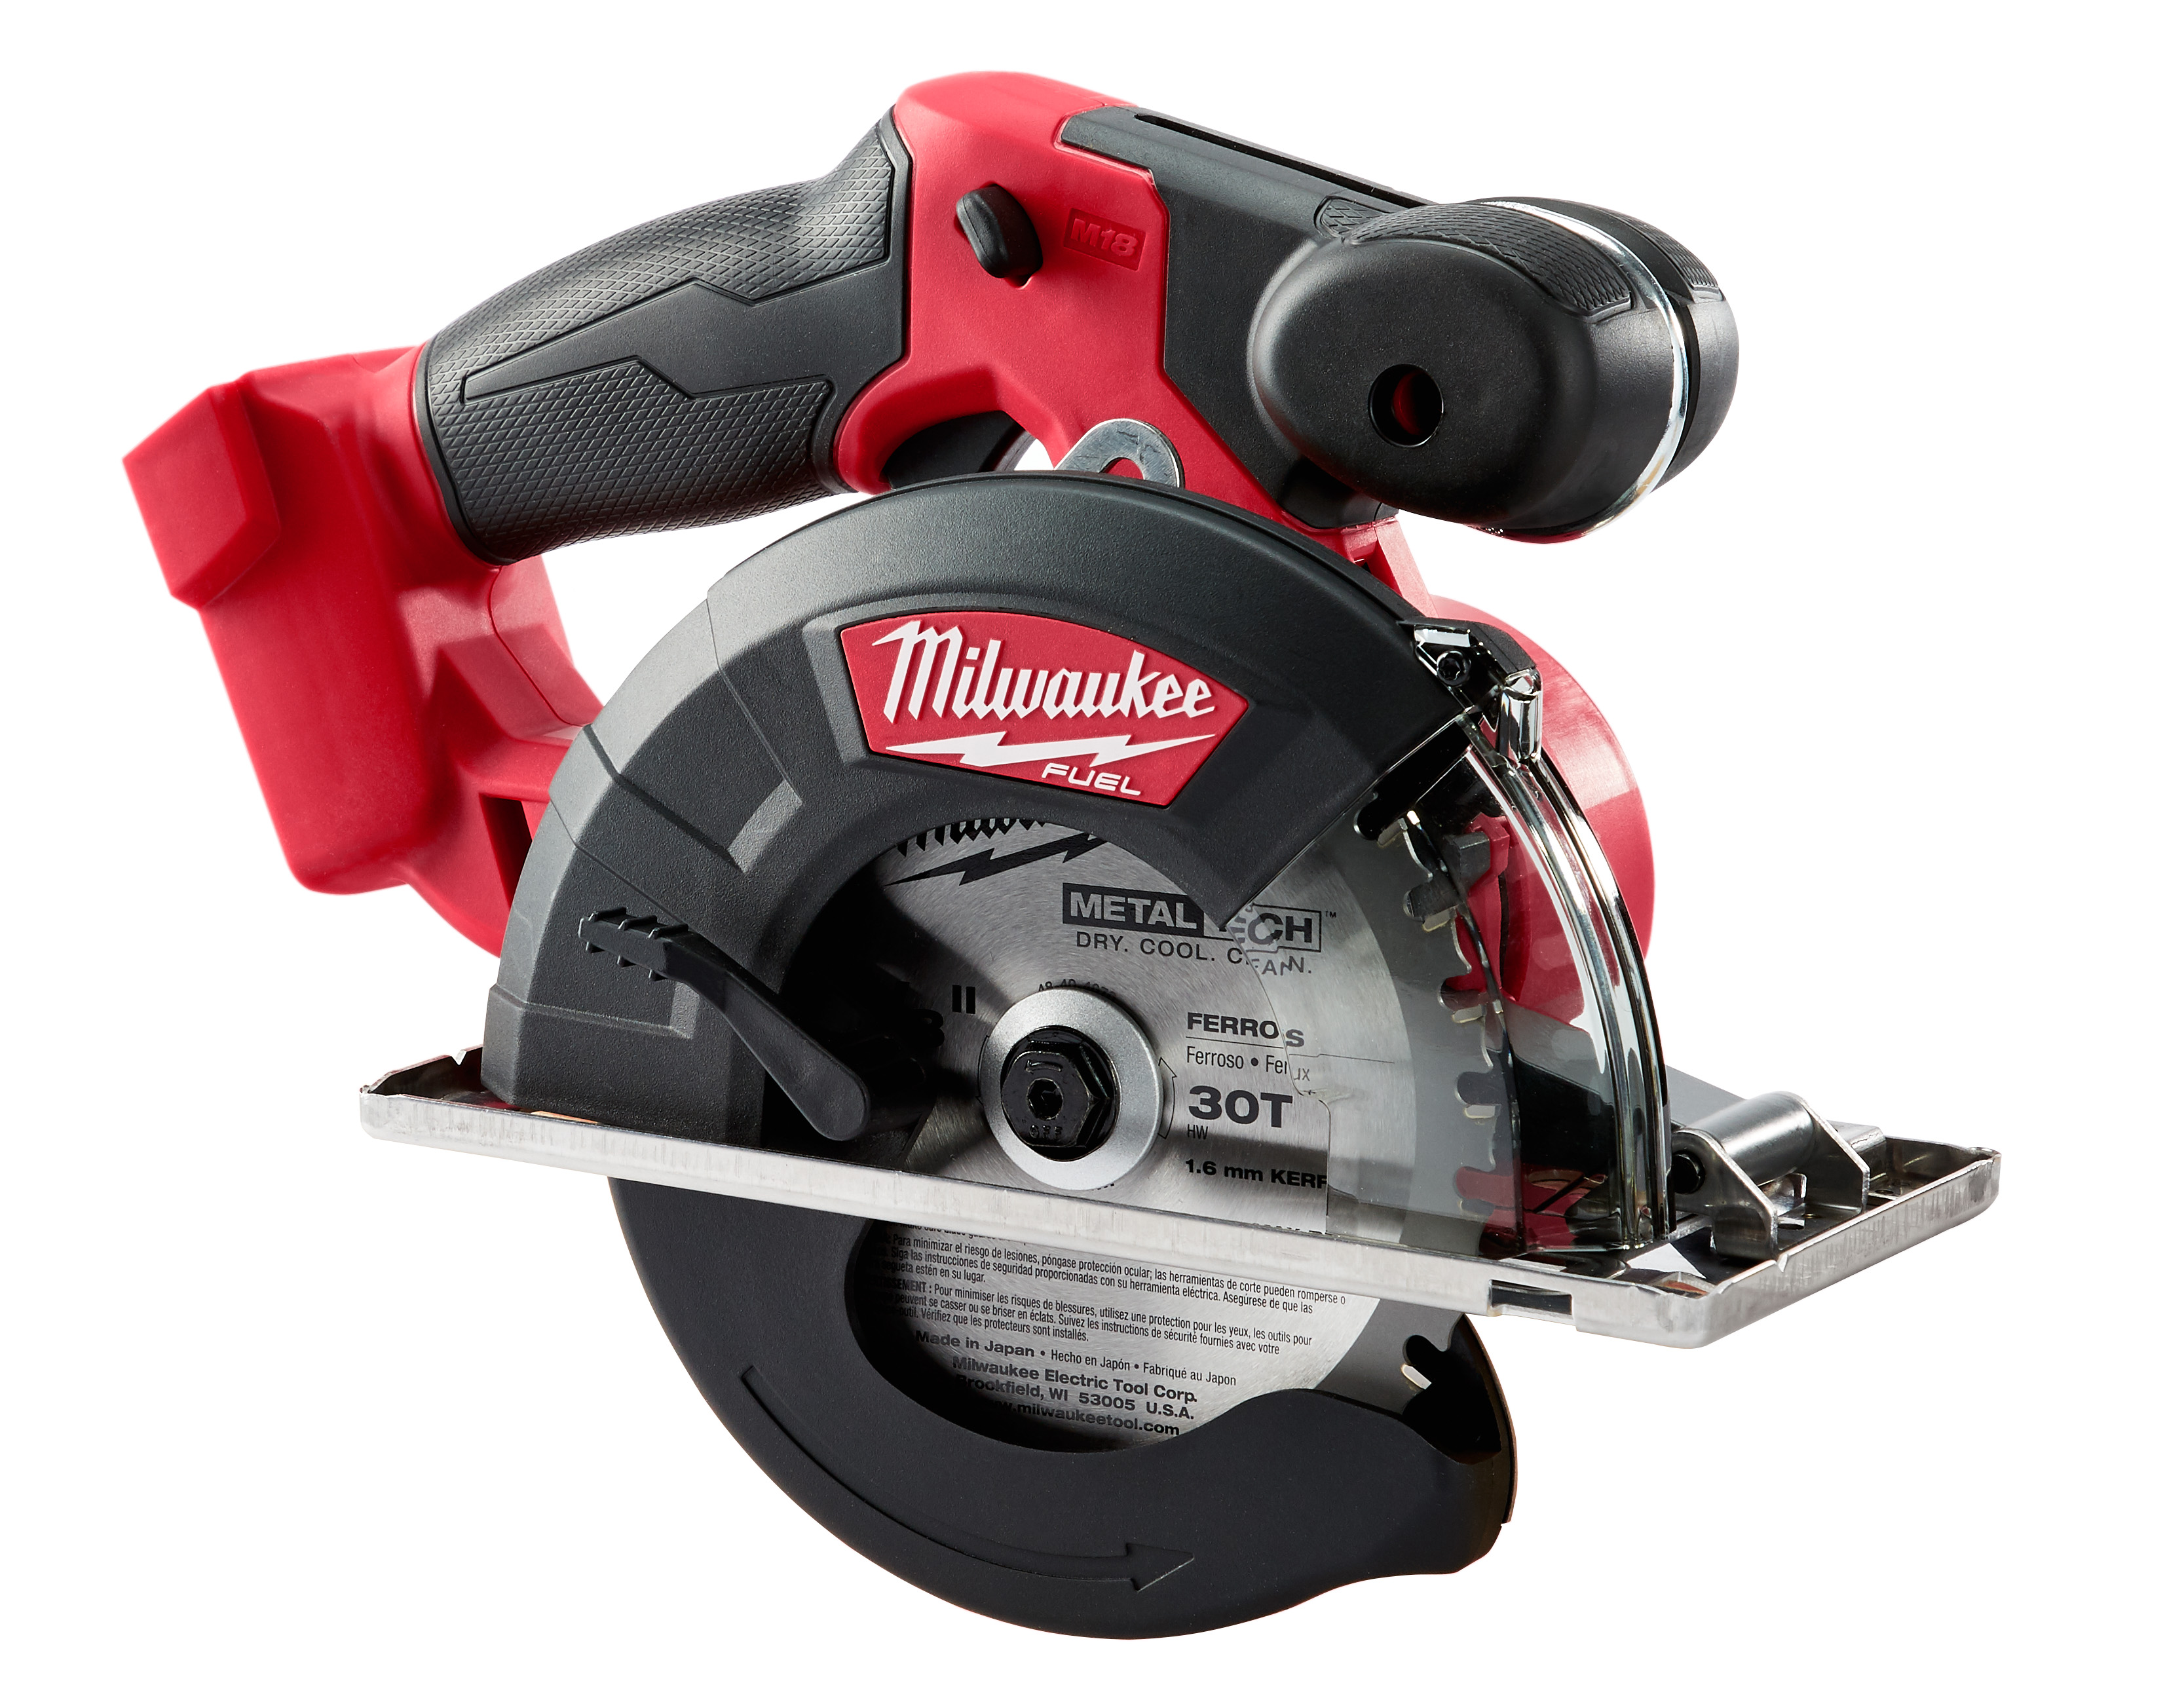 M18 FUEL 18 Volt Lithium-Ion Cordless Metal Circular Saw - Tool Only